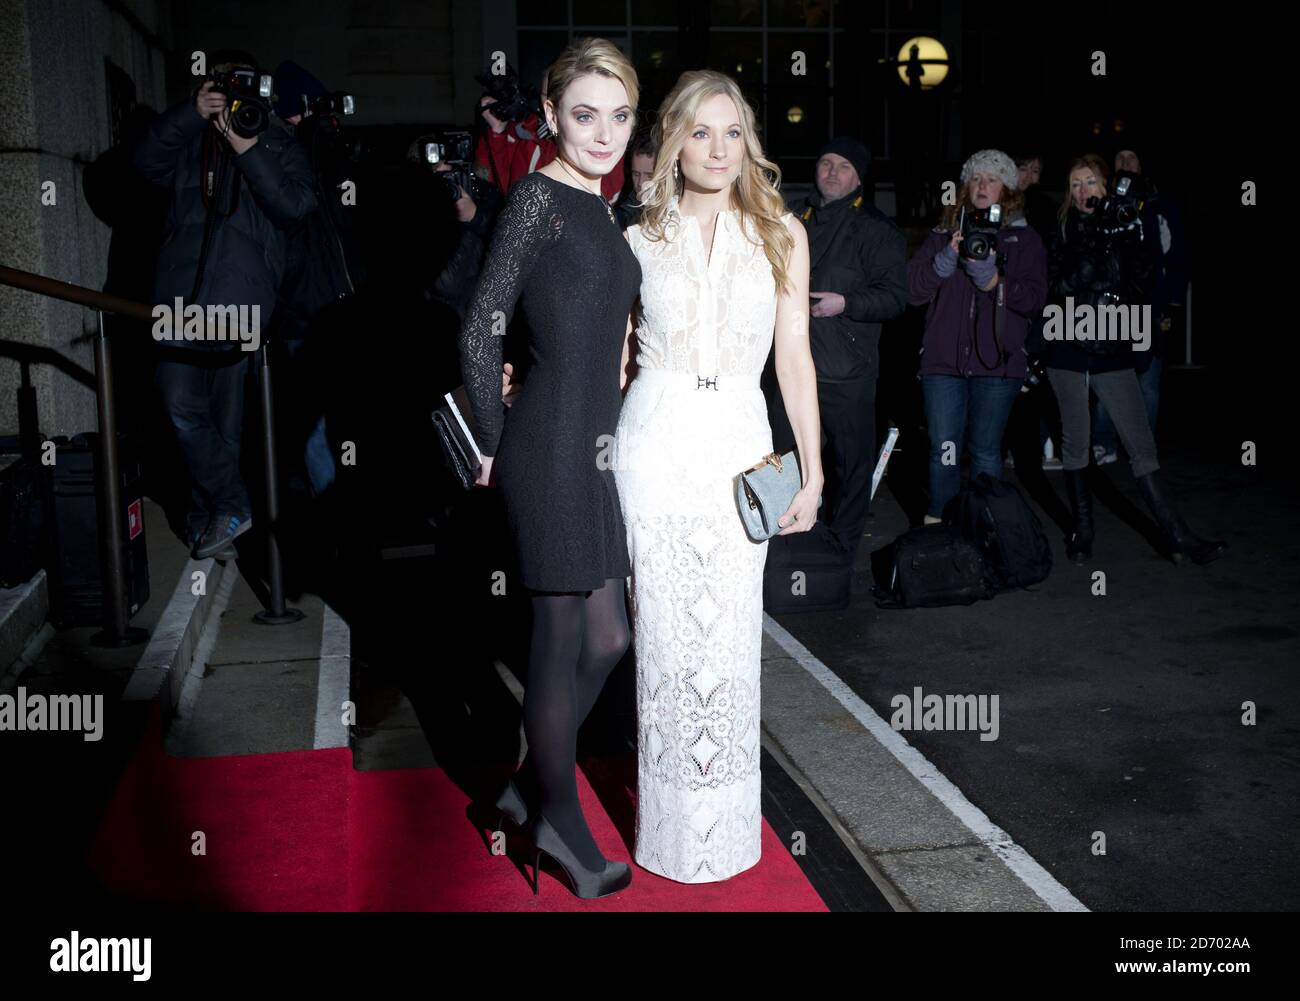 Christine Bottomley and Joanne Froggatt arriving at the Evening Standard British Film Awards 2012, at the London Film Museum. Stock Photo